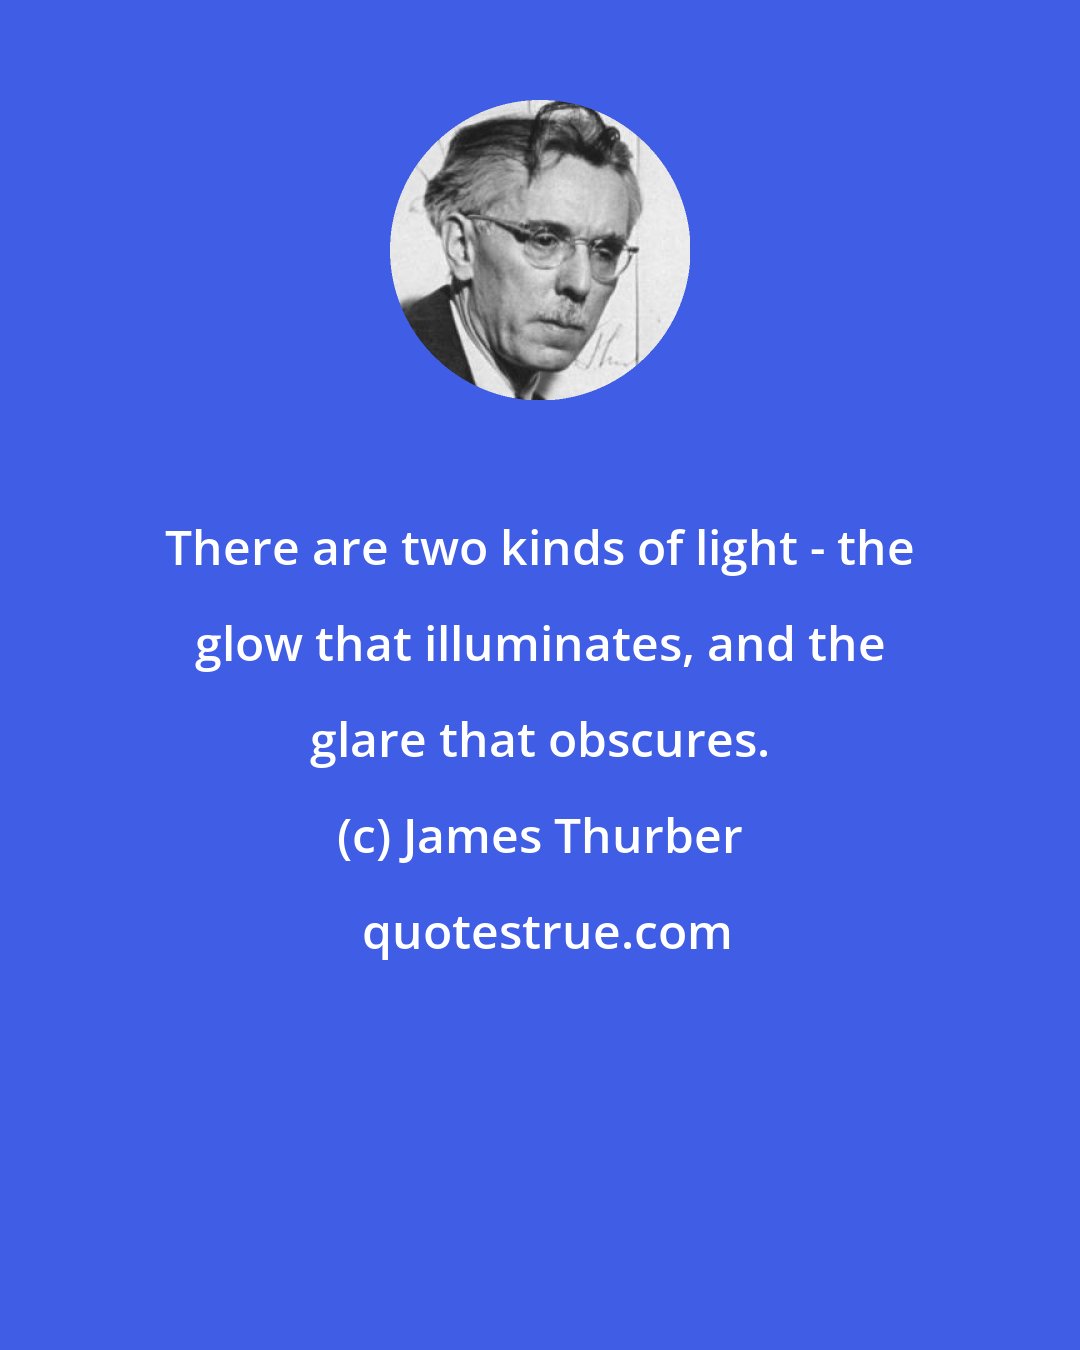 James Thurber: There are two kinds of light - the glow that illuminates, and the glare that obscures.